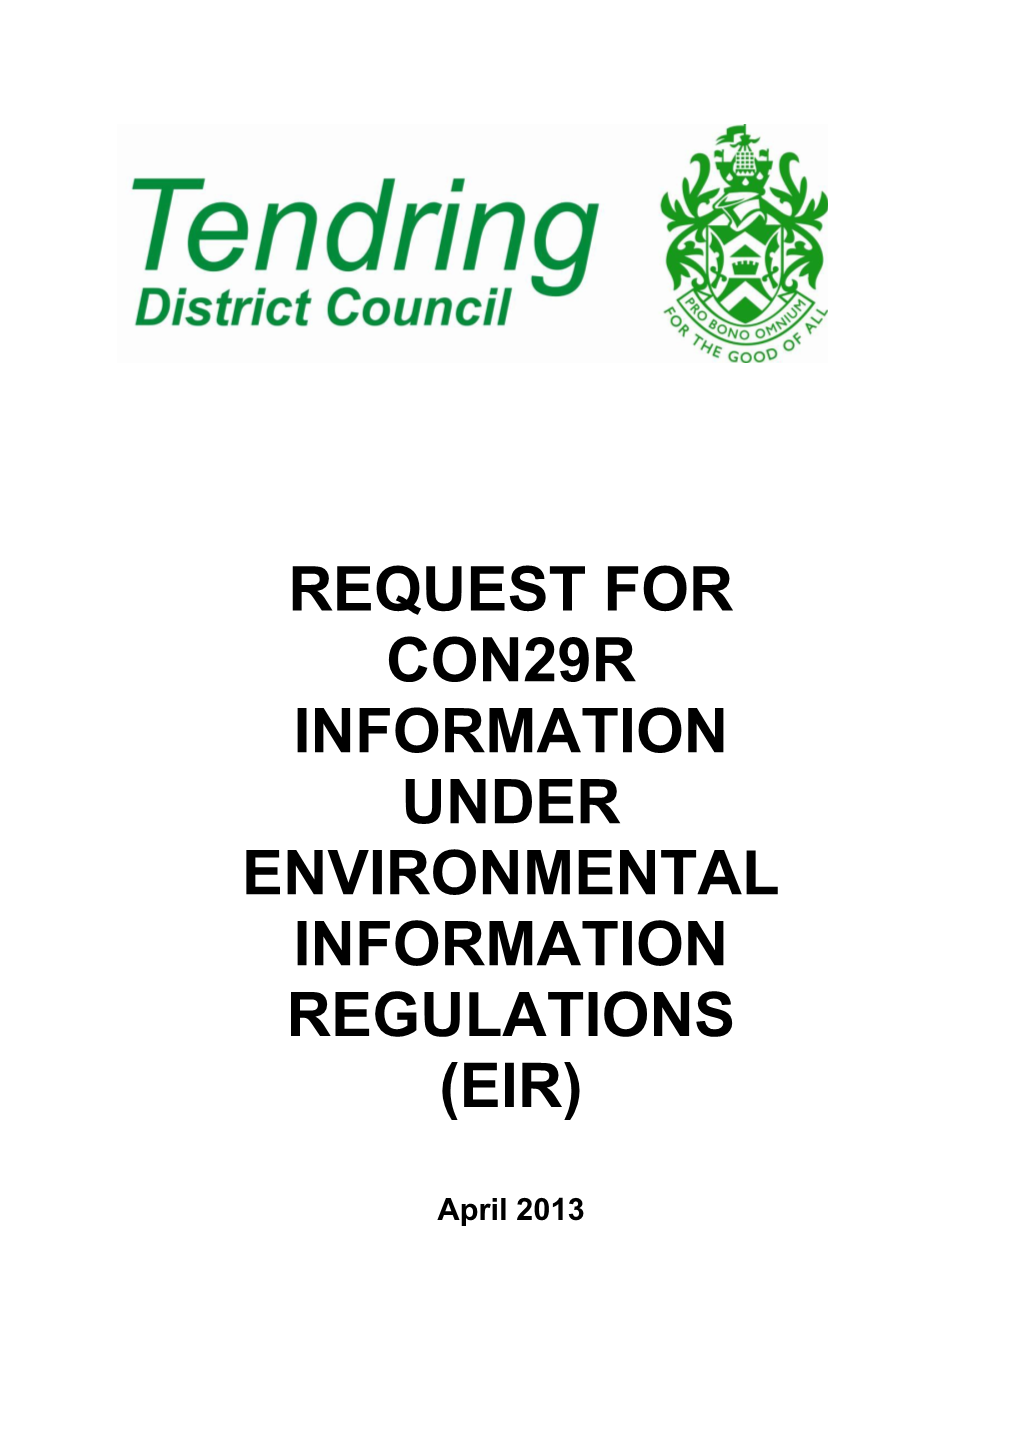 Please Use This Form to Request CON29R That Is Not Available on the TDC Website Or Via